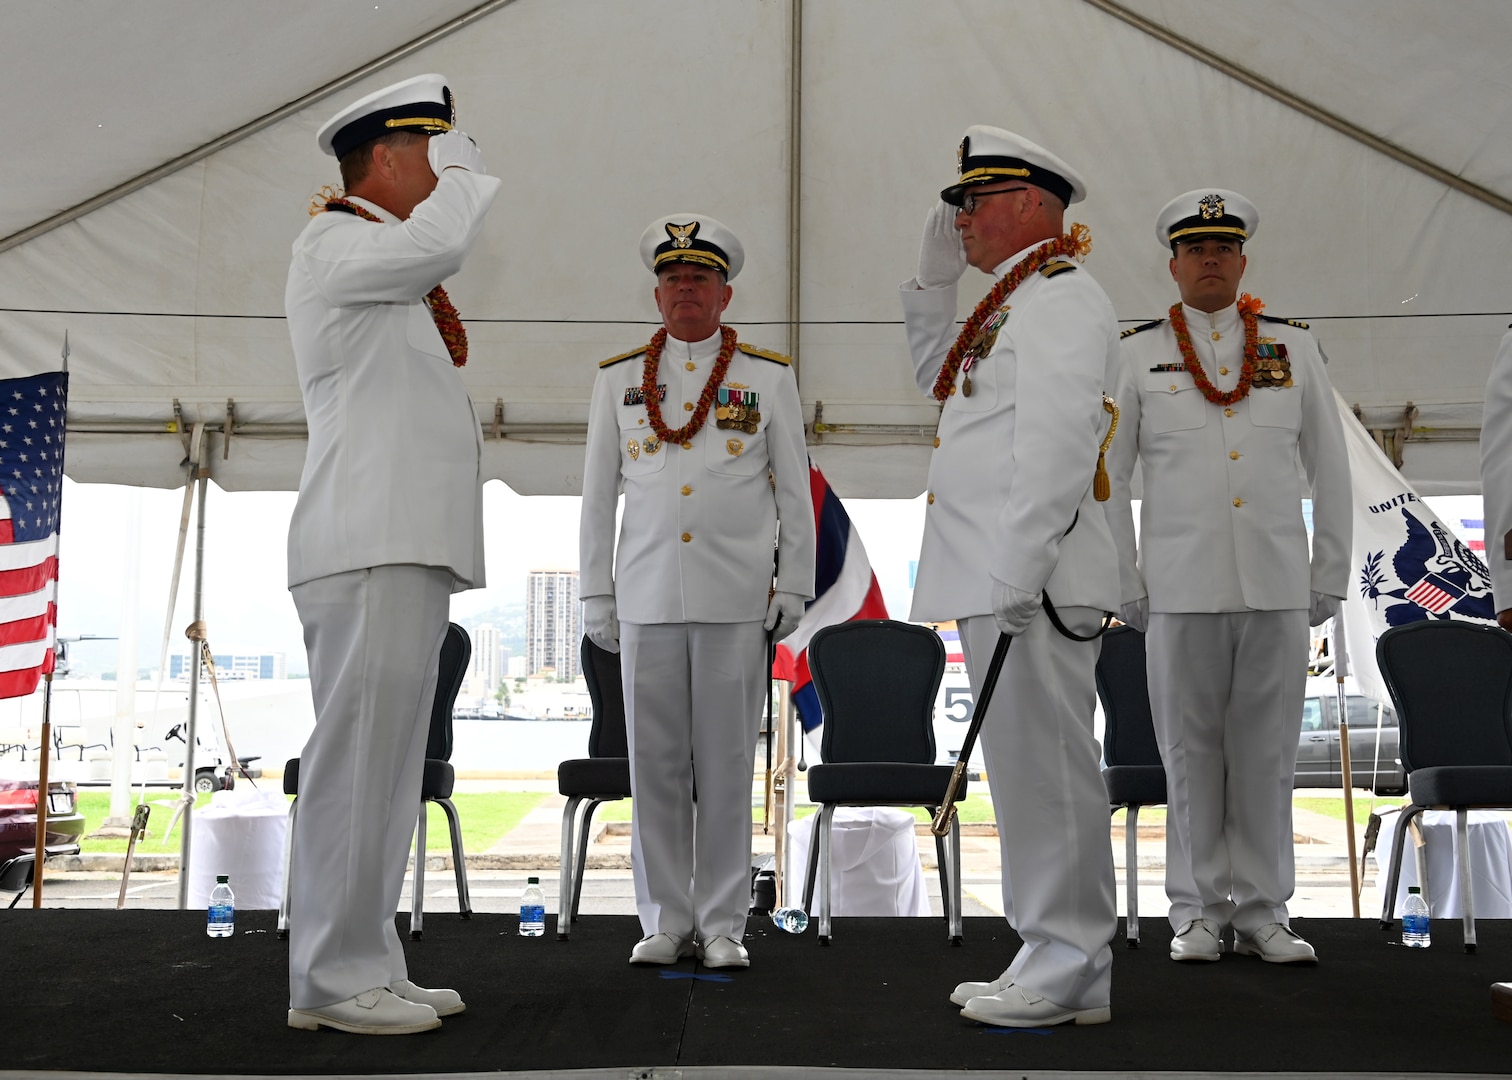 Capt. Bob Kinsey (left) and Capt. Tom D’Arcy (right) salute each other during the U.S. Coast Guard Cutter Kimball’s (WMSL 756) change of command ceremony on Base Honolulu, July 21, 2023. Rear Adm. Brendan C. McPherson (center), deputy commander of U.S. Coast Guard Pacific Area, presided over the ceremony in which Kinsey relieved D’Arcy as Kimball’s commanding officer. U.S. Coast Guard photo by Chief Petty Officer Matthew Masaschi.